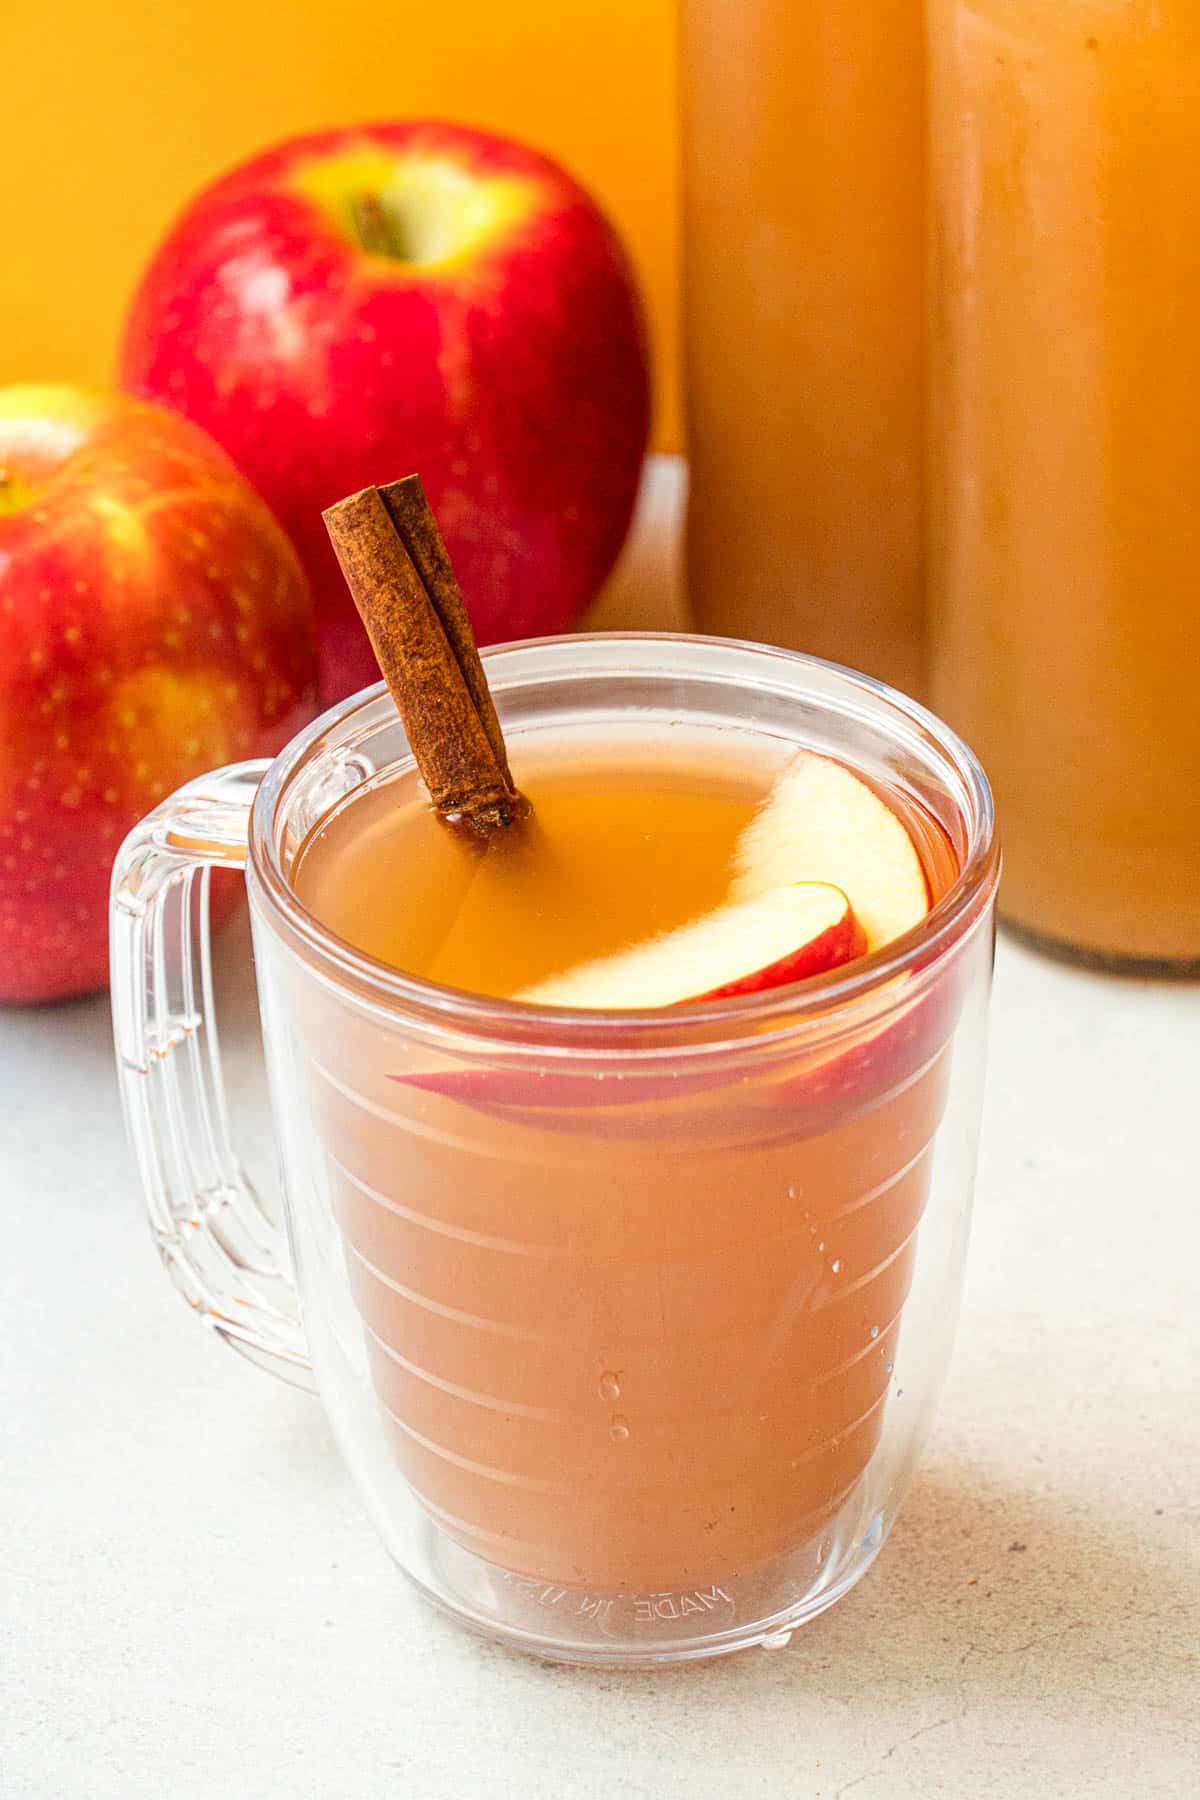 Homemade apple cider in a mug, garnished with a cinnamon stick.